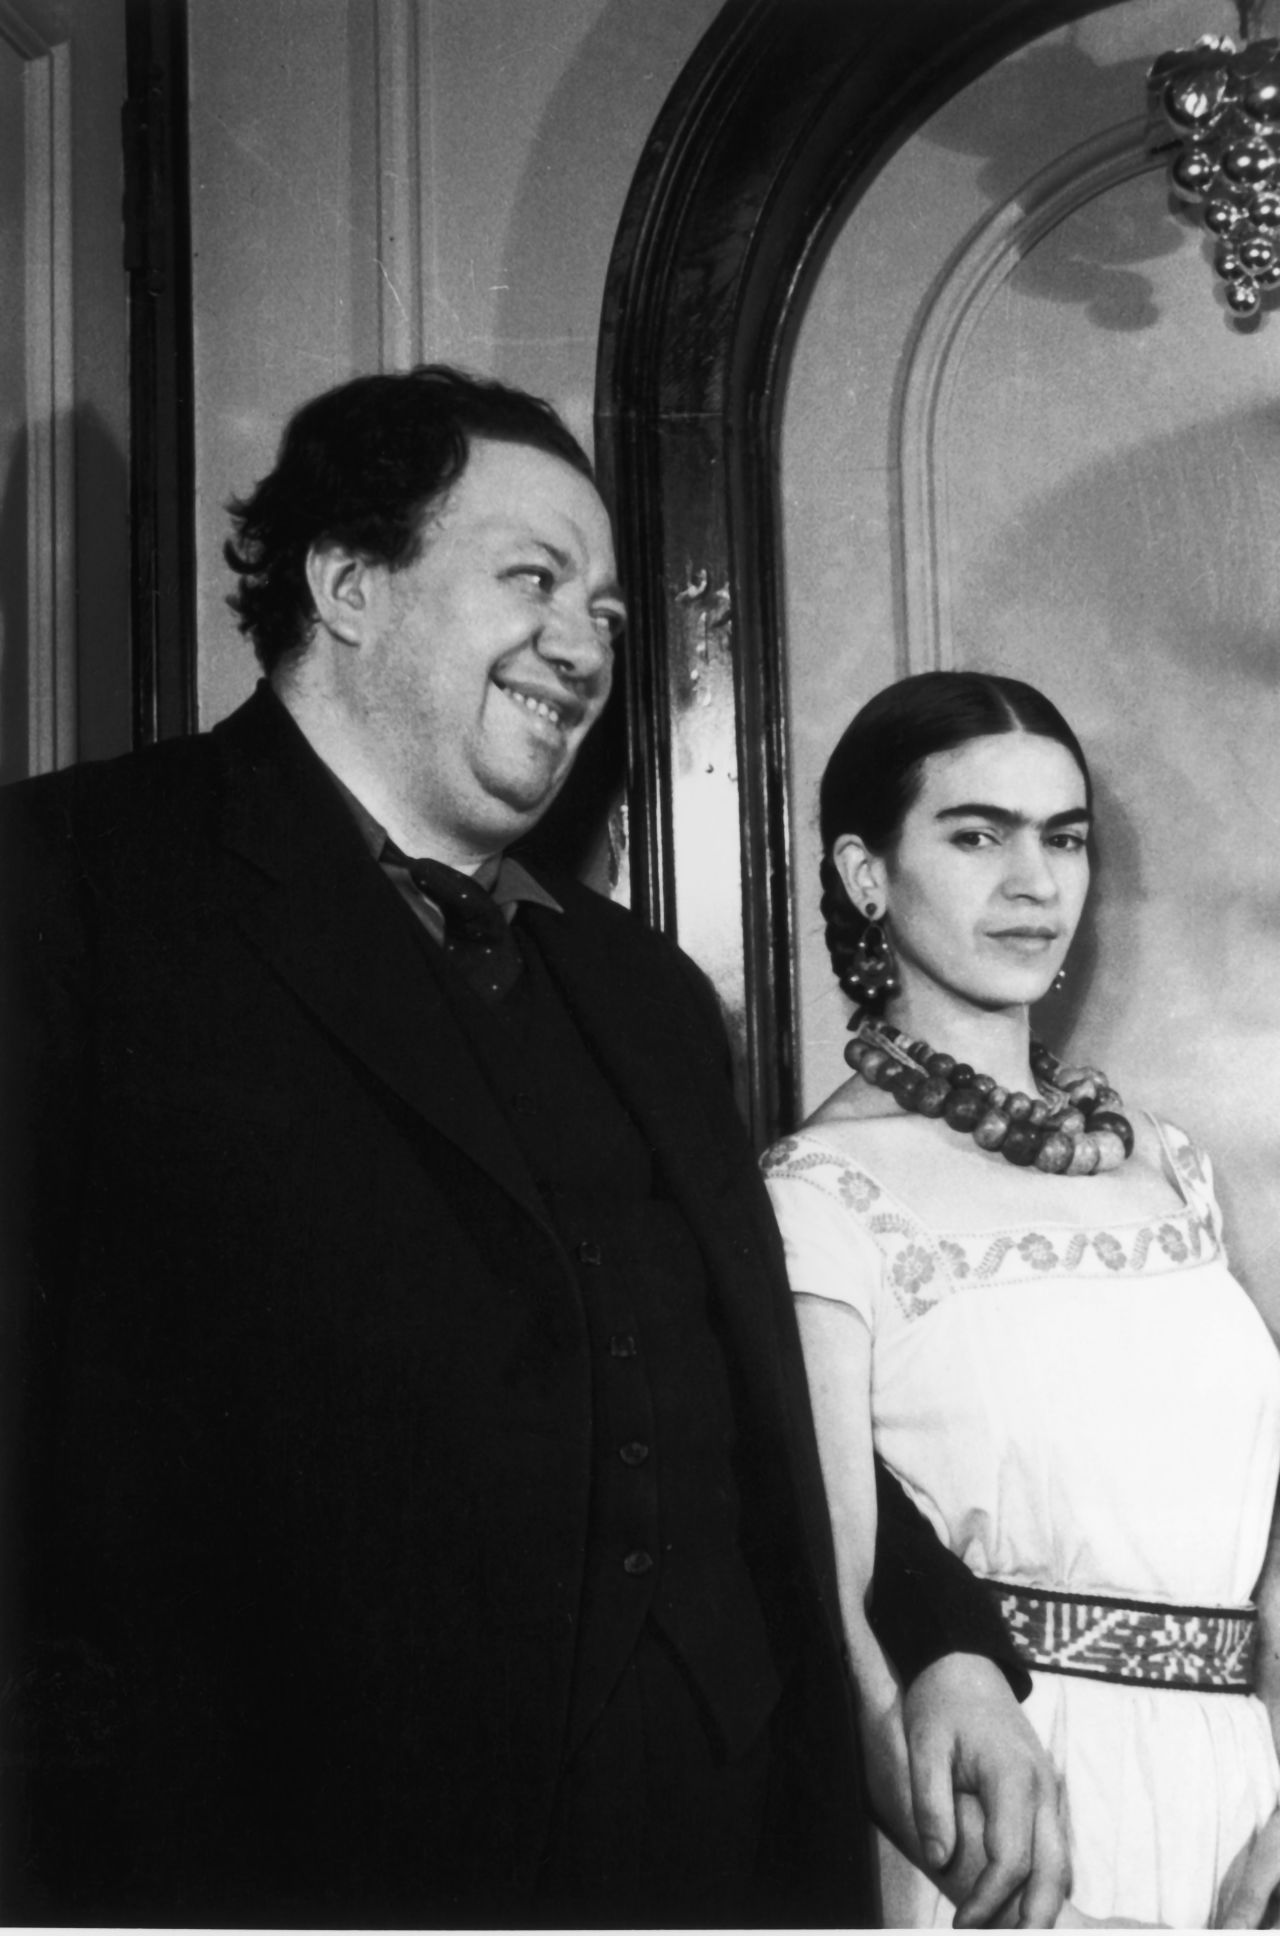 Kahlo married fellow Mexican painter Diego Rivera in 1929. The couple had a tumultuous relationship, with Kahlo having affairs with both men and women.  